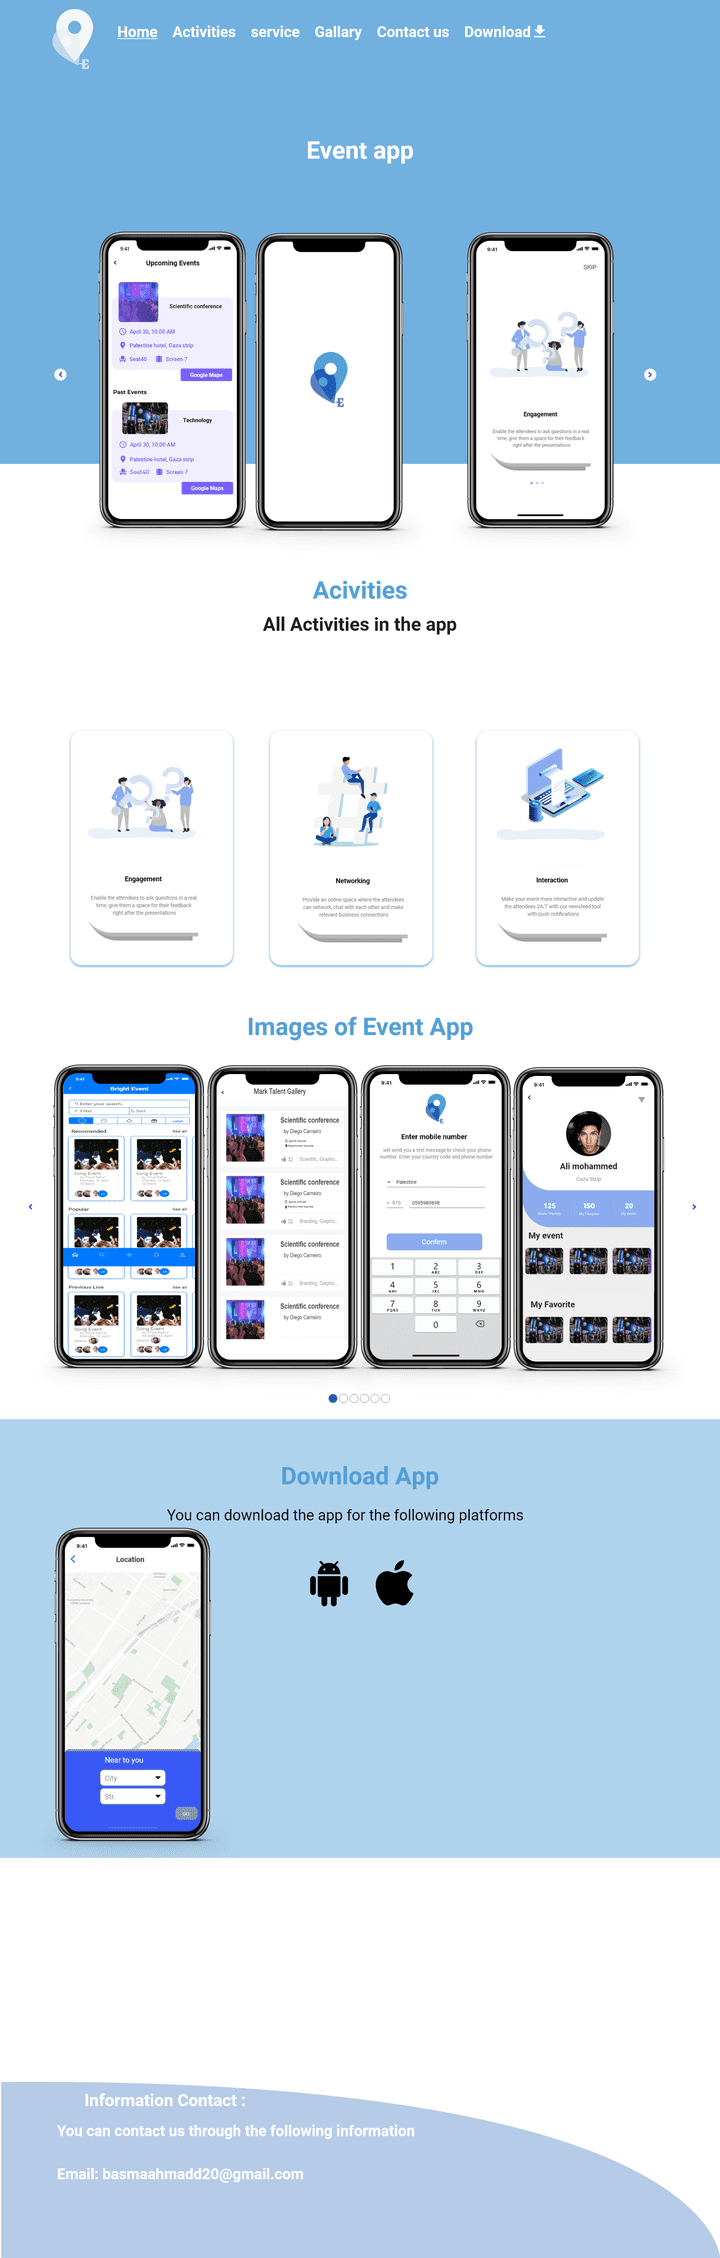 landing page of event application